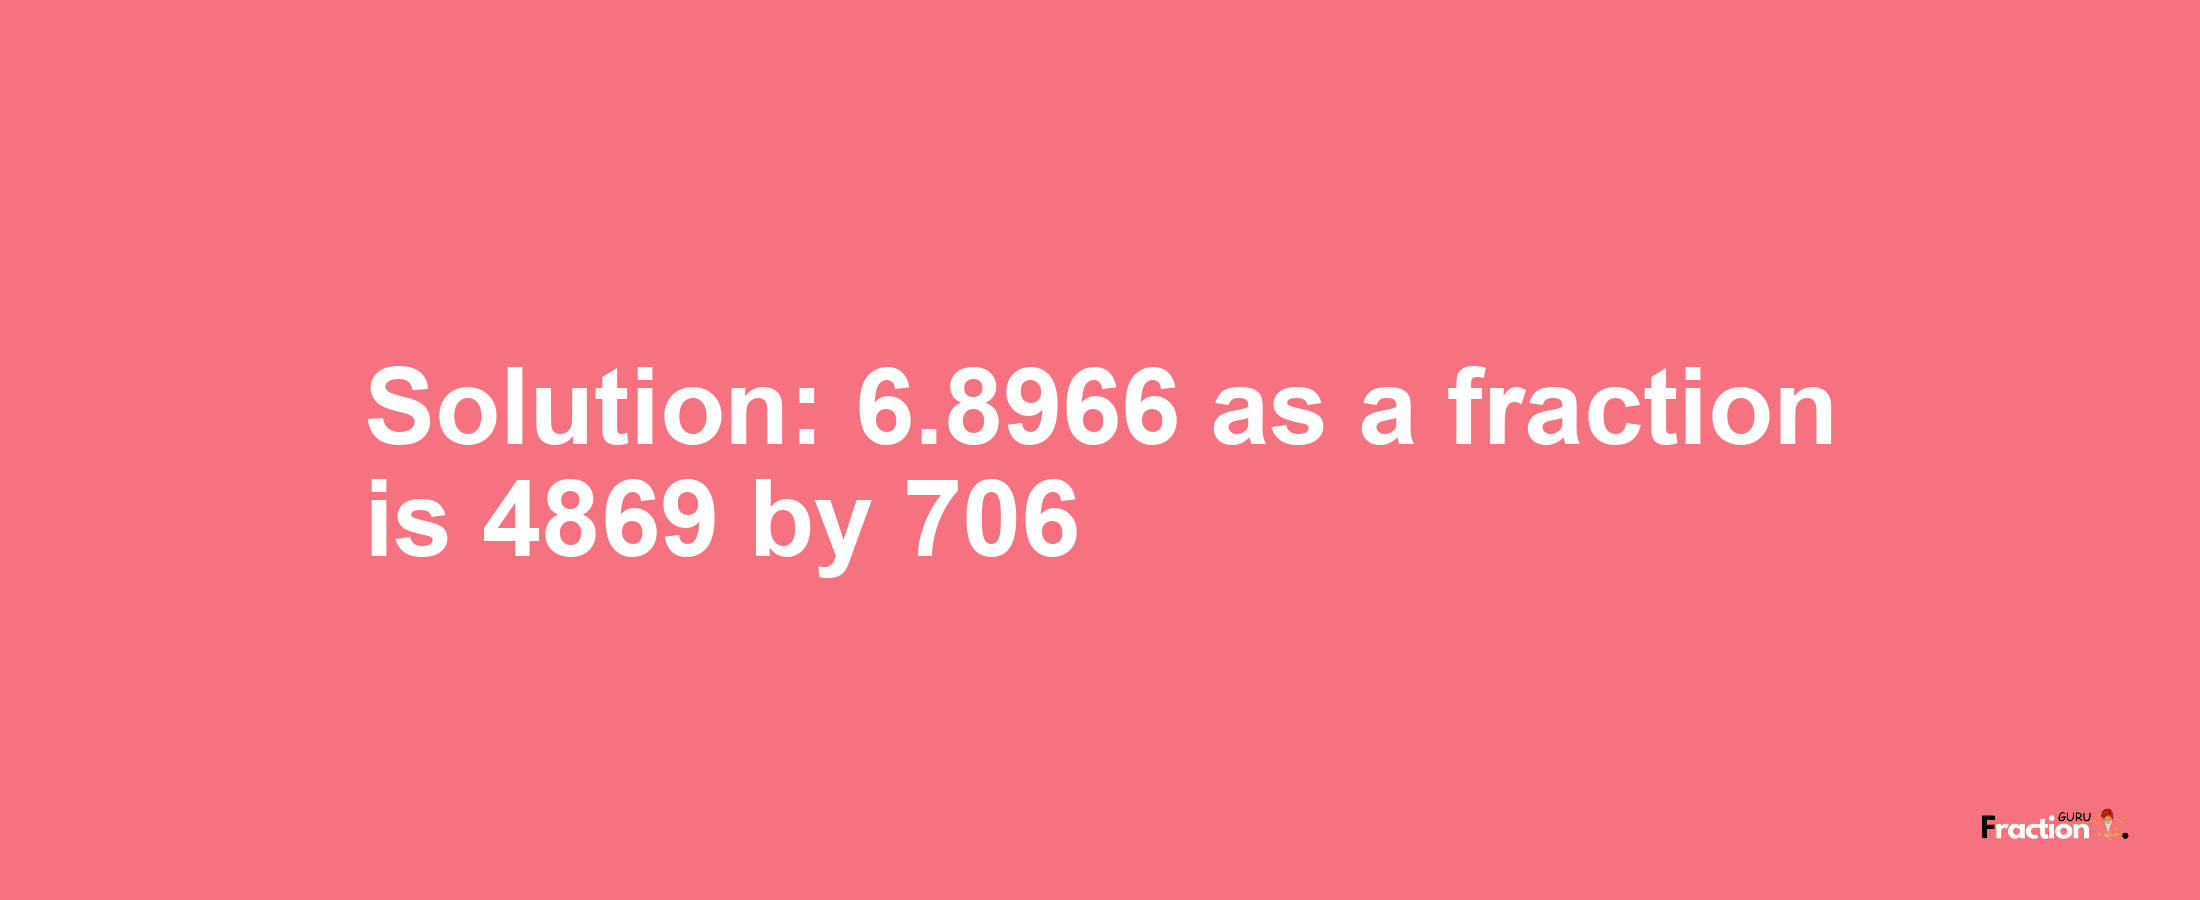 Solution:6.8966 as a fraction is 4869/706